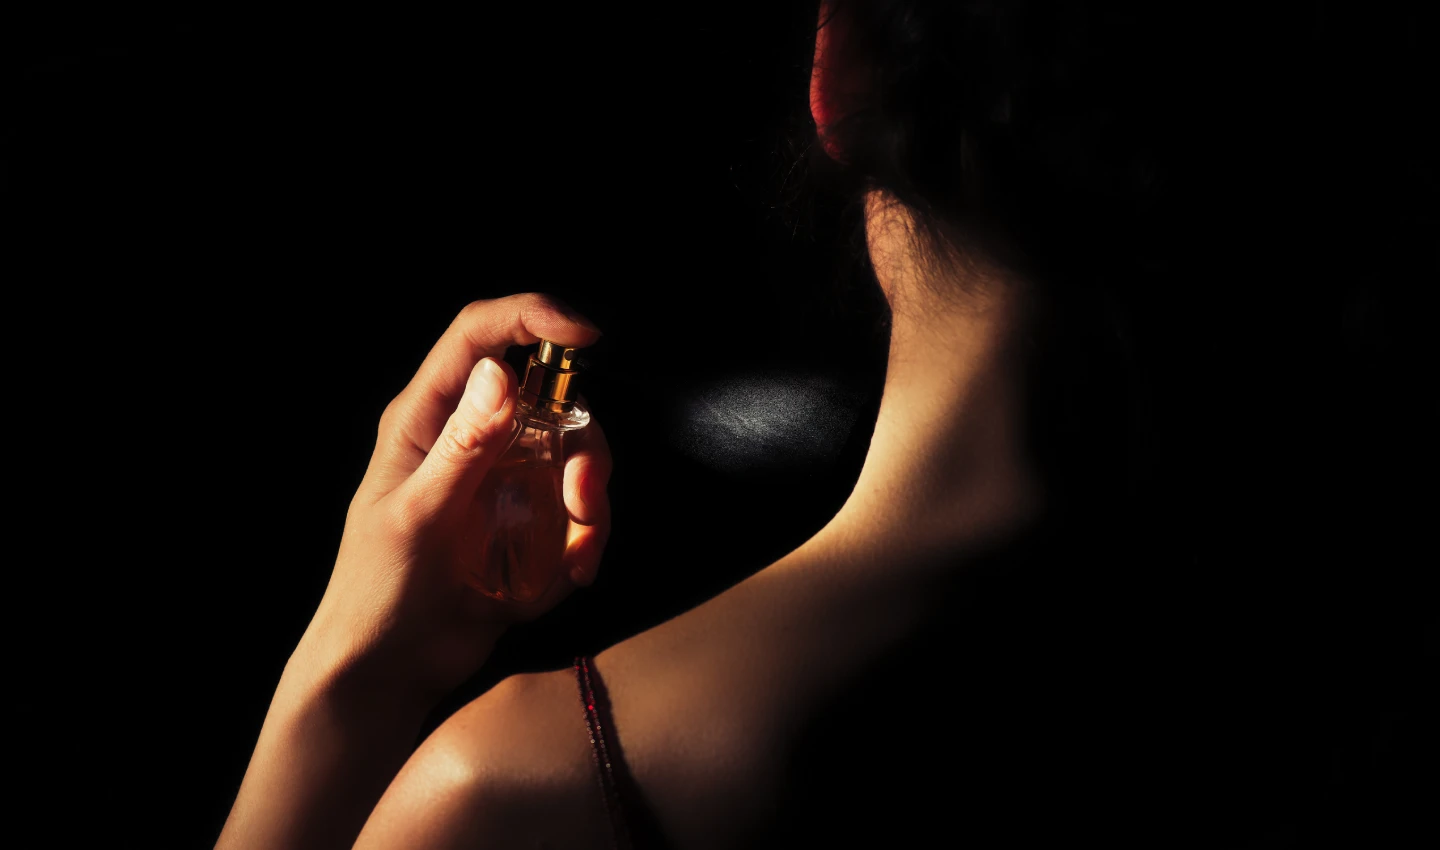 A woman spraying perfume on her neck, exemplifying how scent plays a role in both personal and professional life.